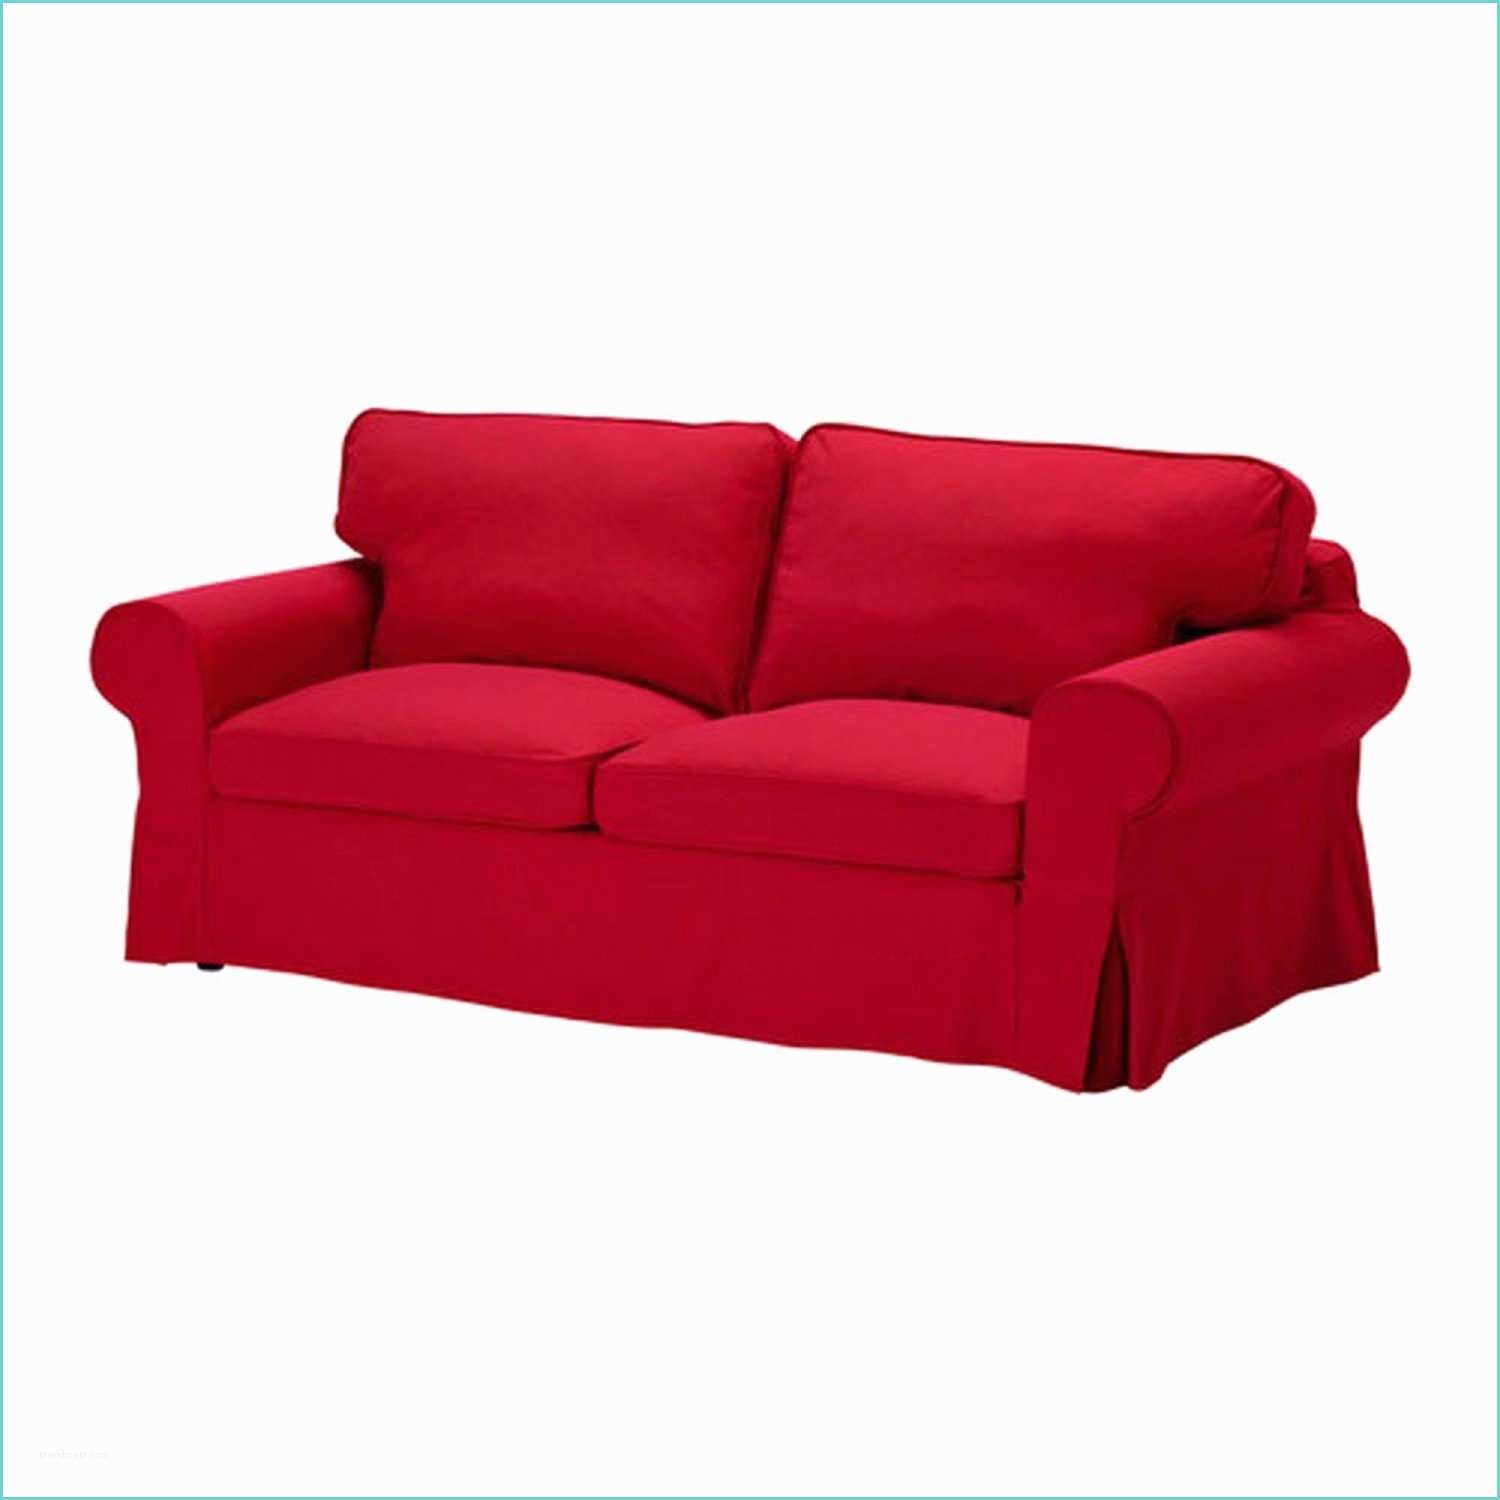 Sofa Beds In Ikea Ikea Ektorp sofa Bed Slipcover Cover Idemo Red sofabed Cvr